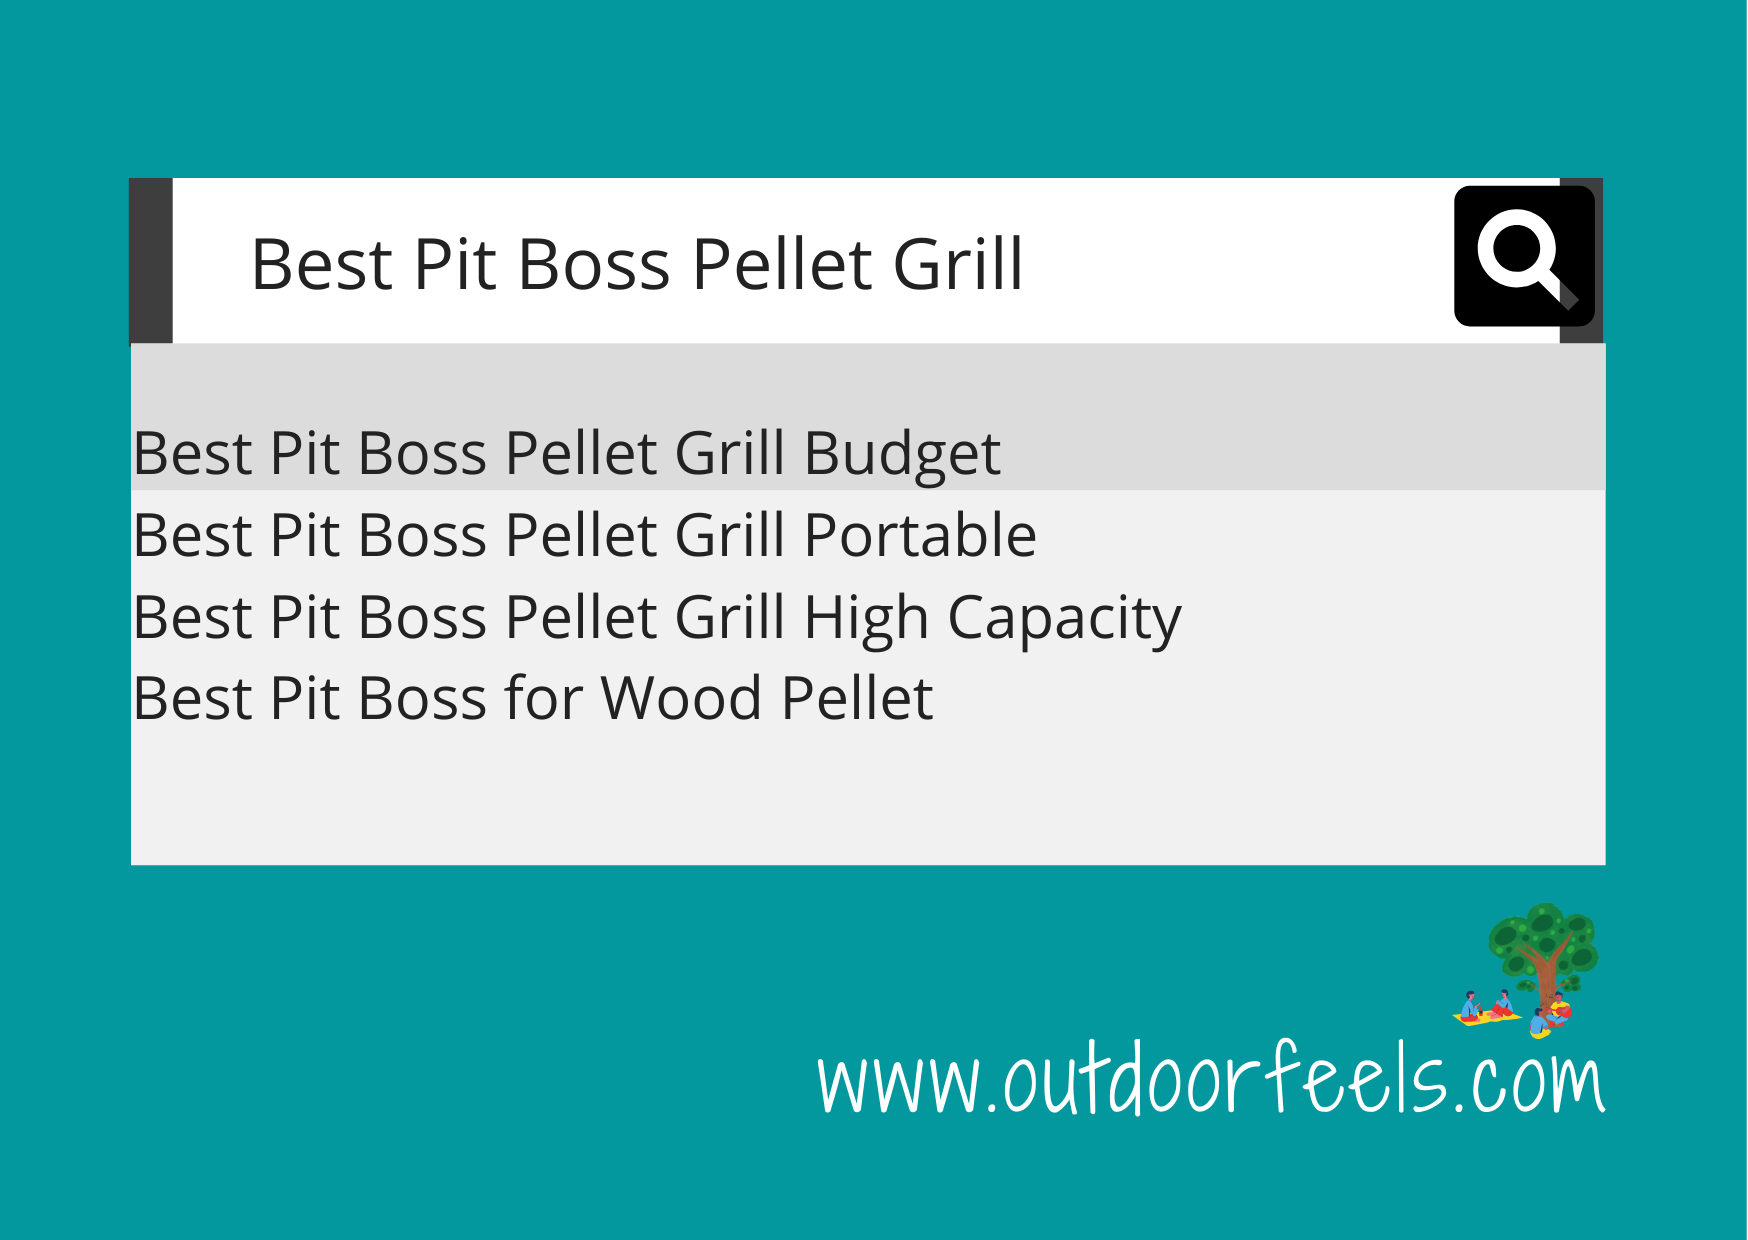 Best Pit Boss Pellet Grill- Featured Image